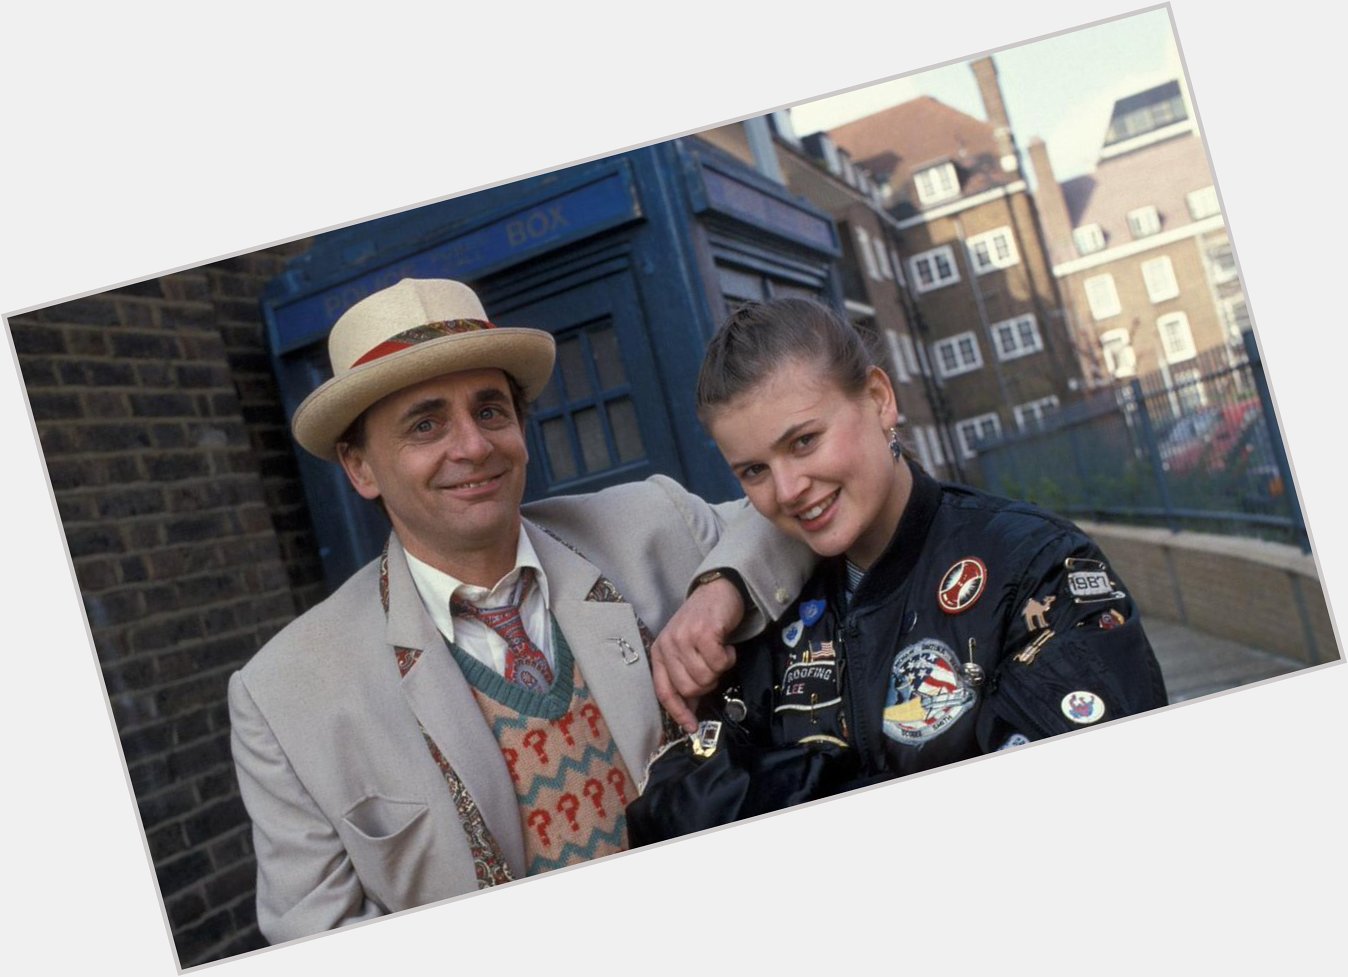 Happy birthday to Sylvester McCoy and They played the Seventh Doctor and Ace McShane on 